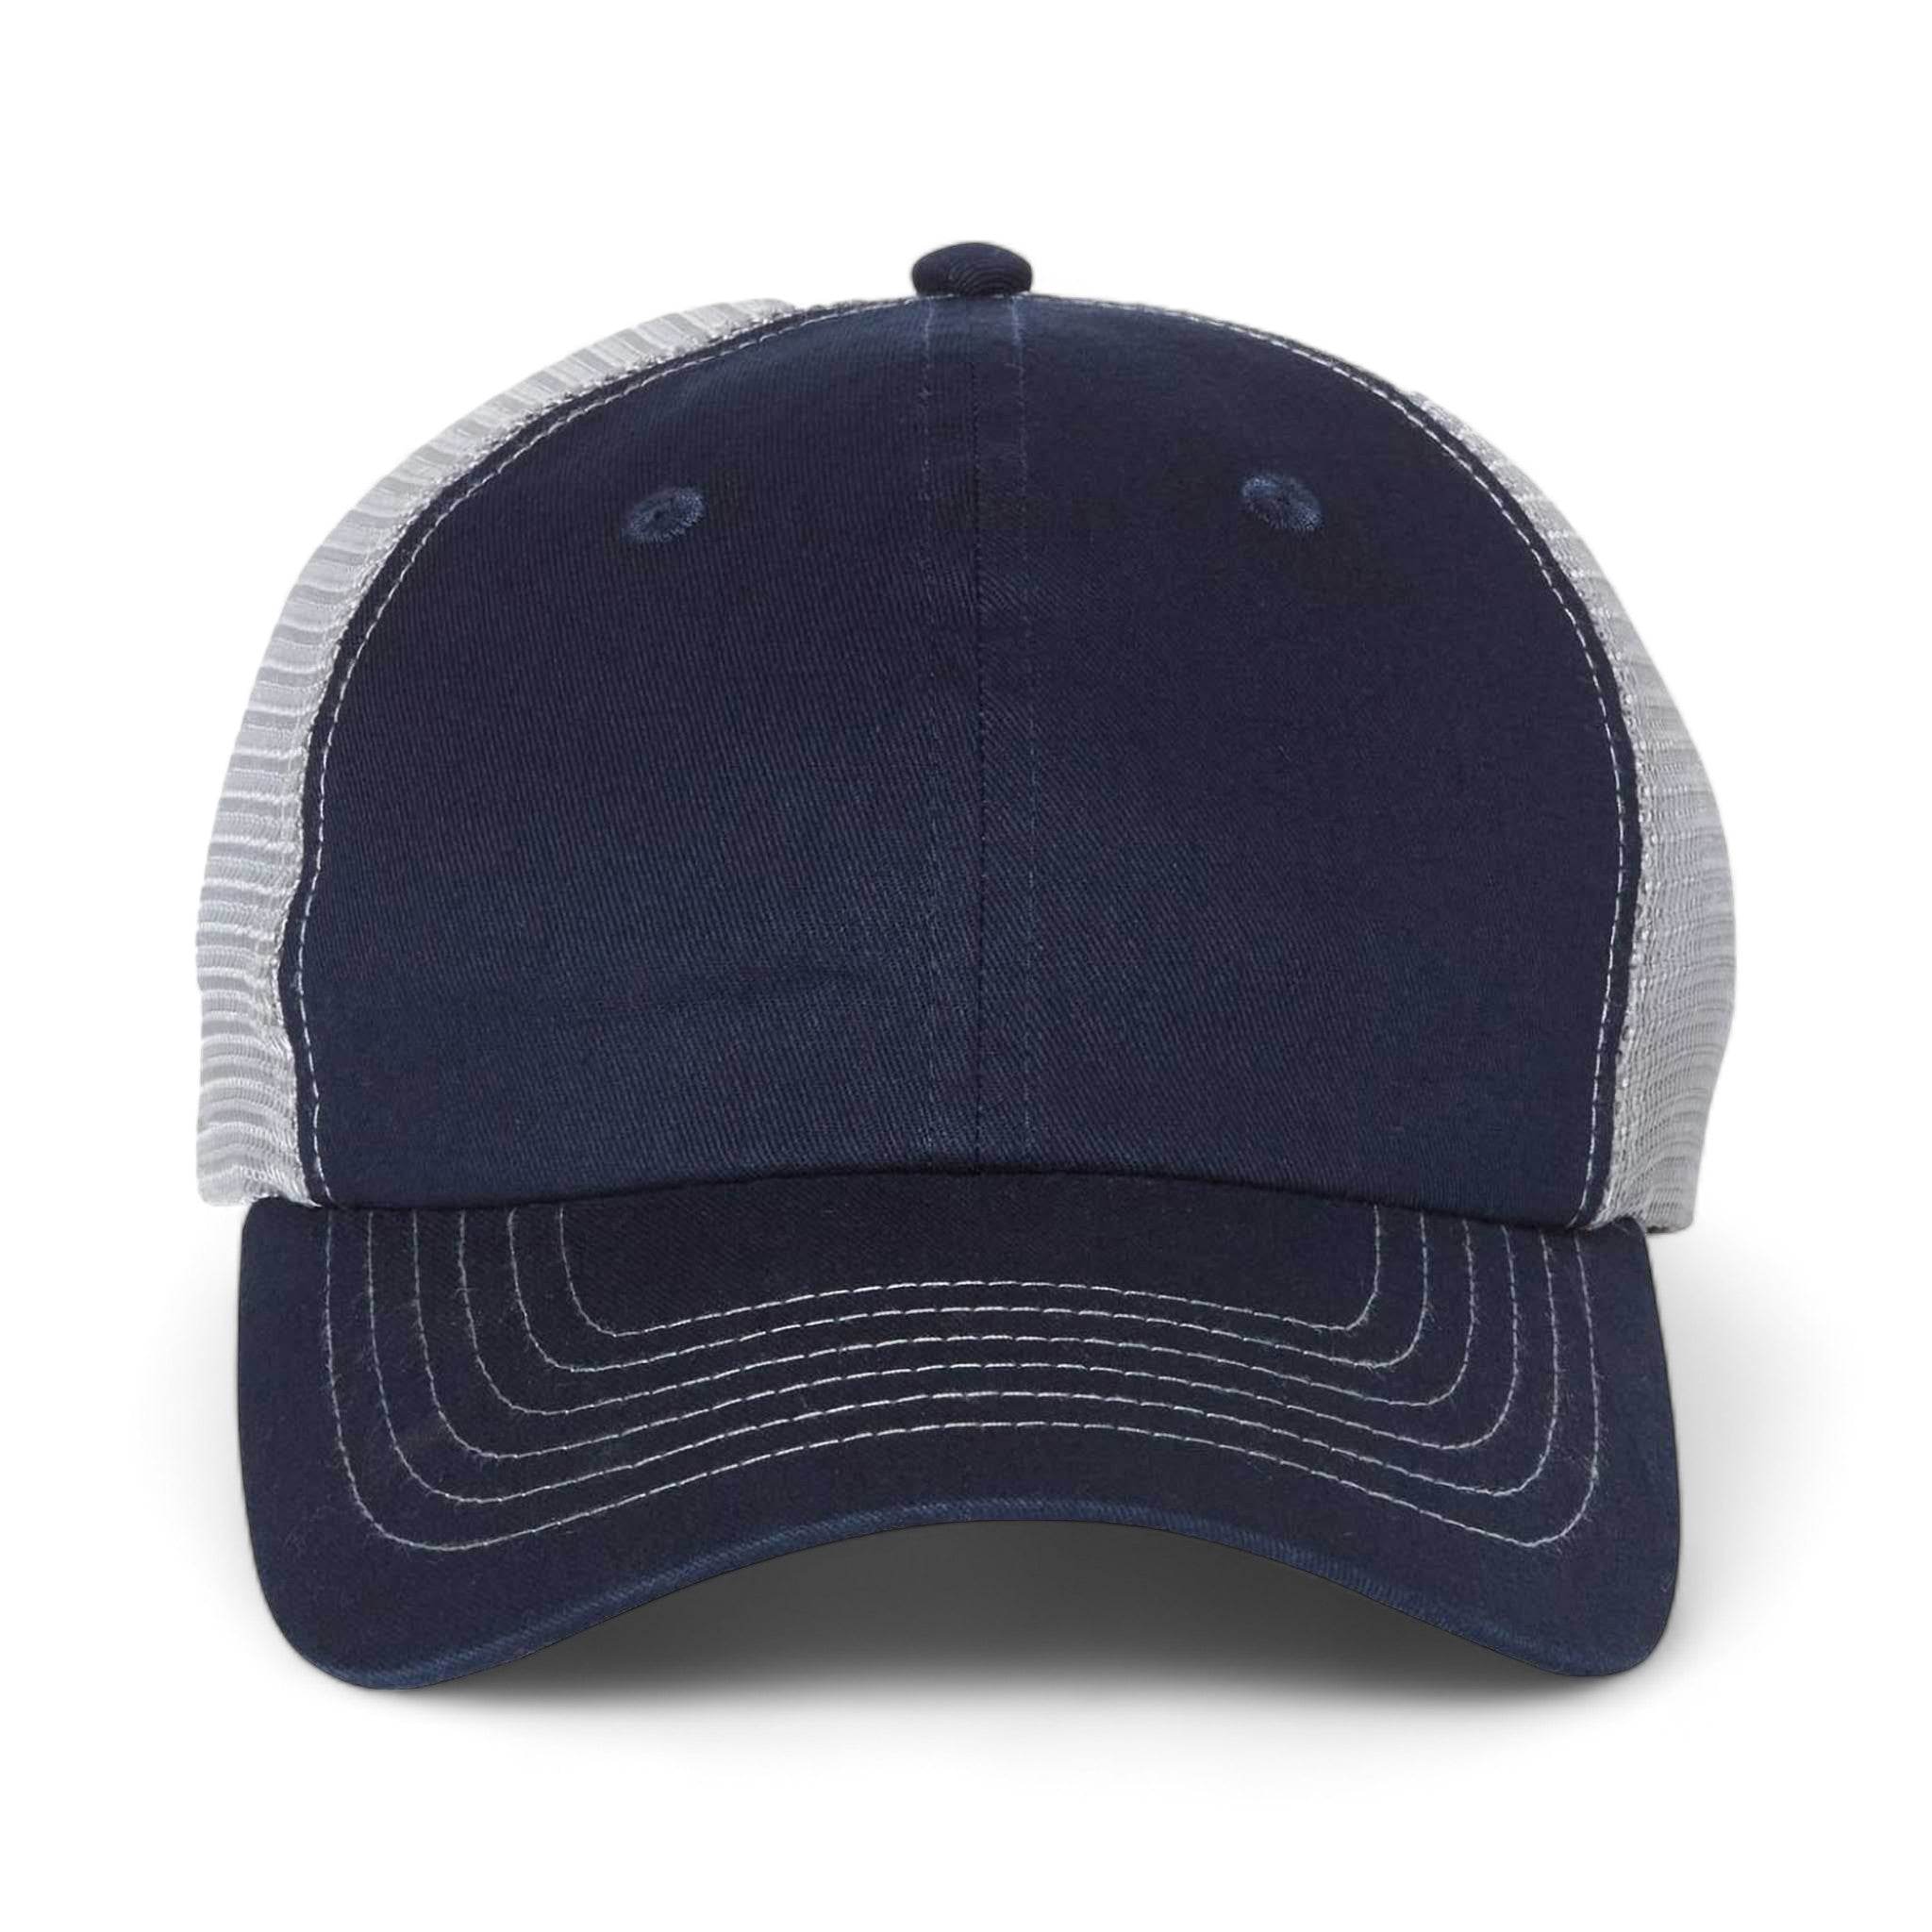 Front view of Sportsman 3100 custom hat in navy and grey